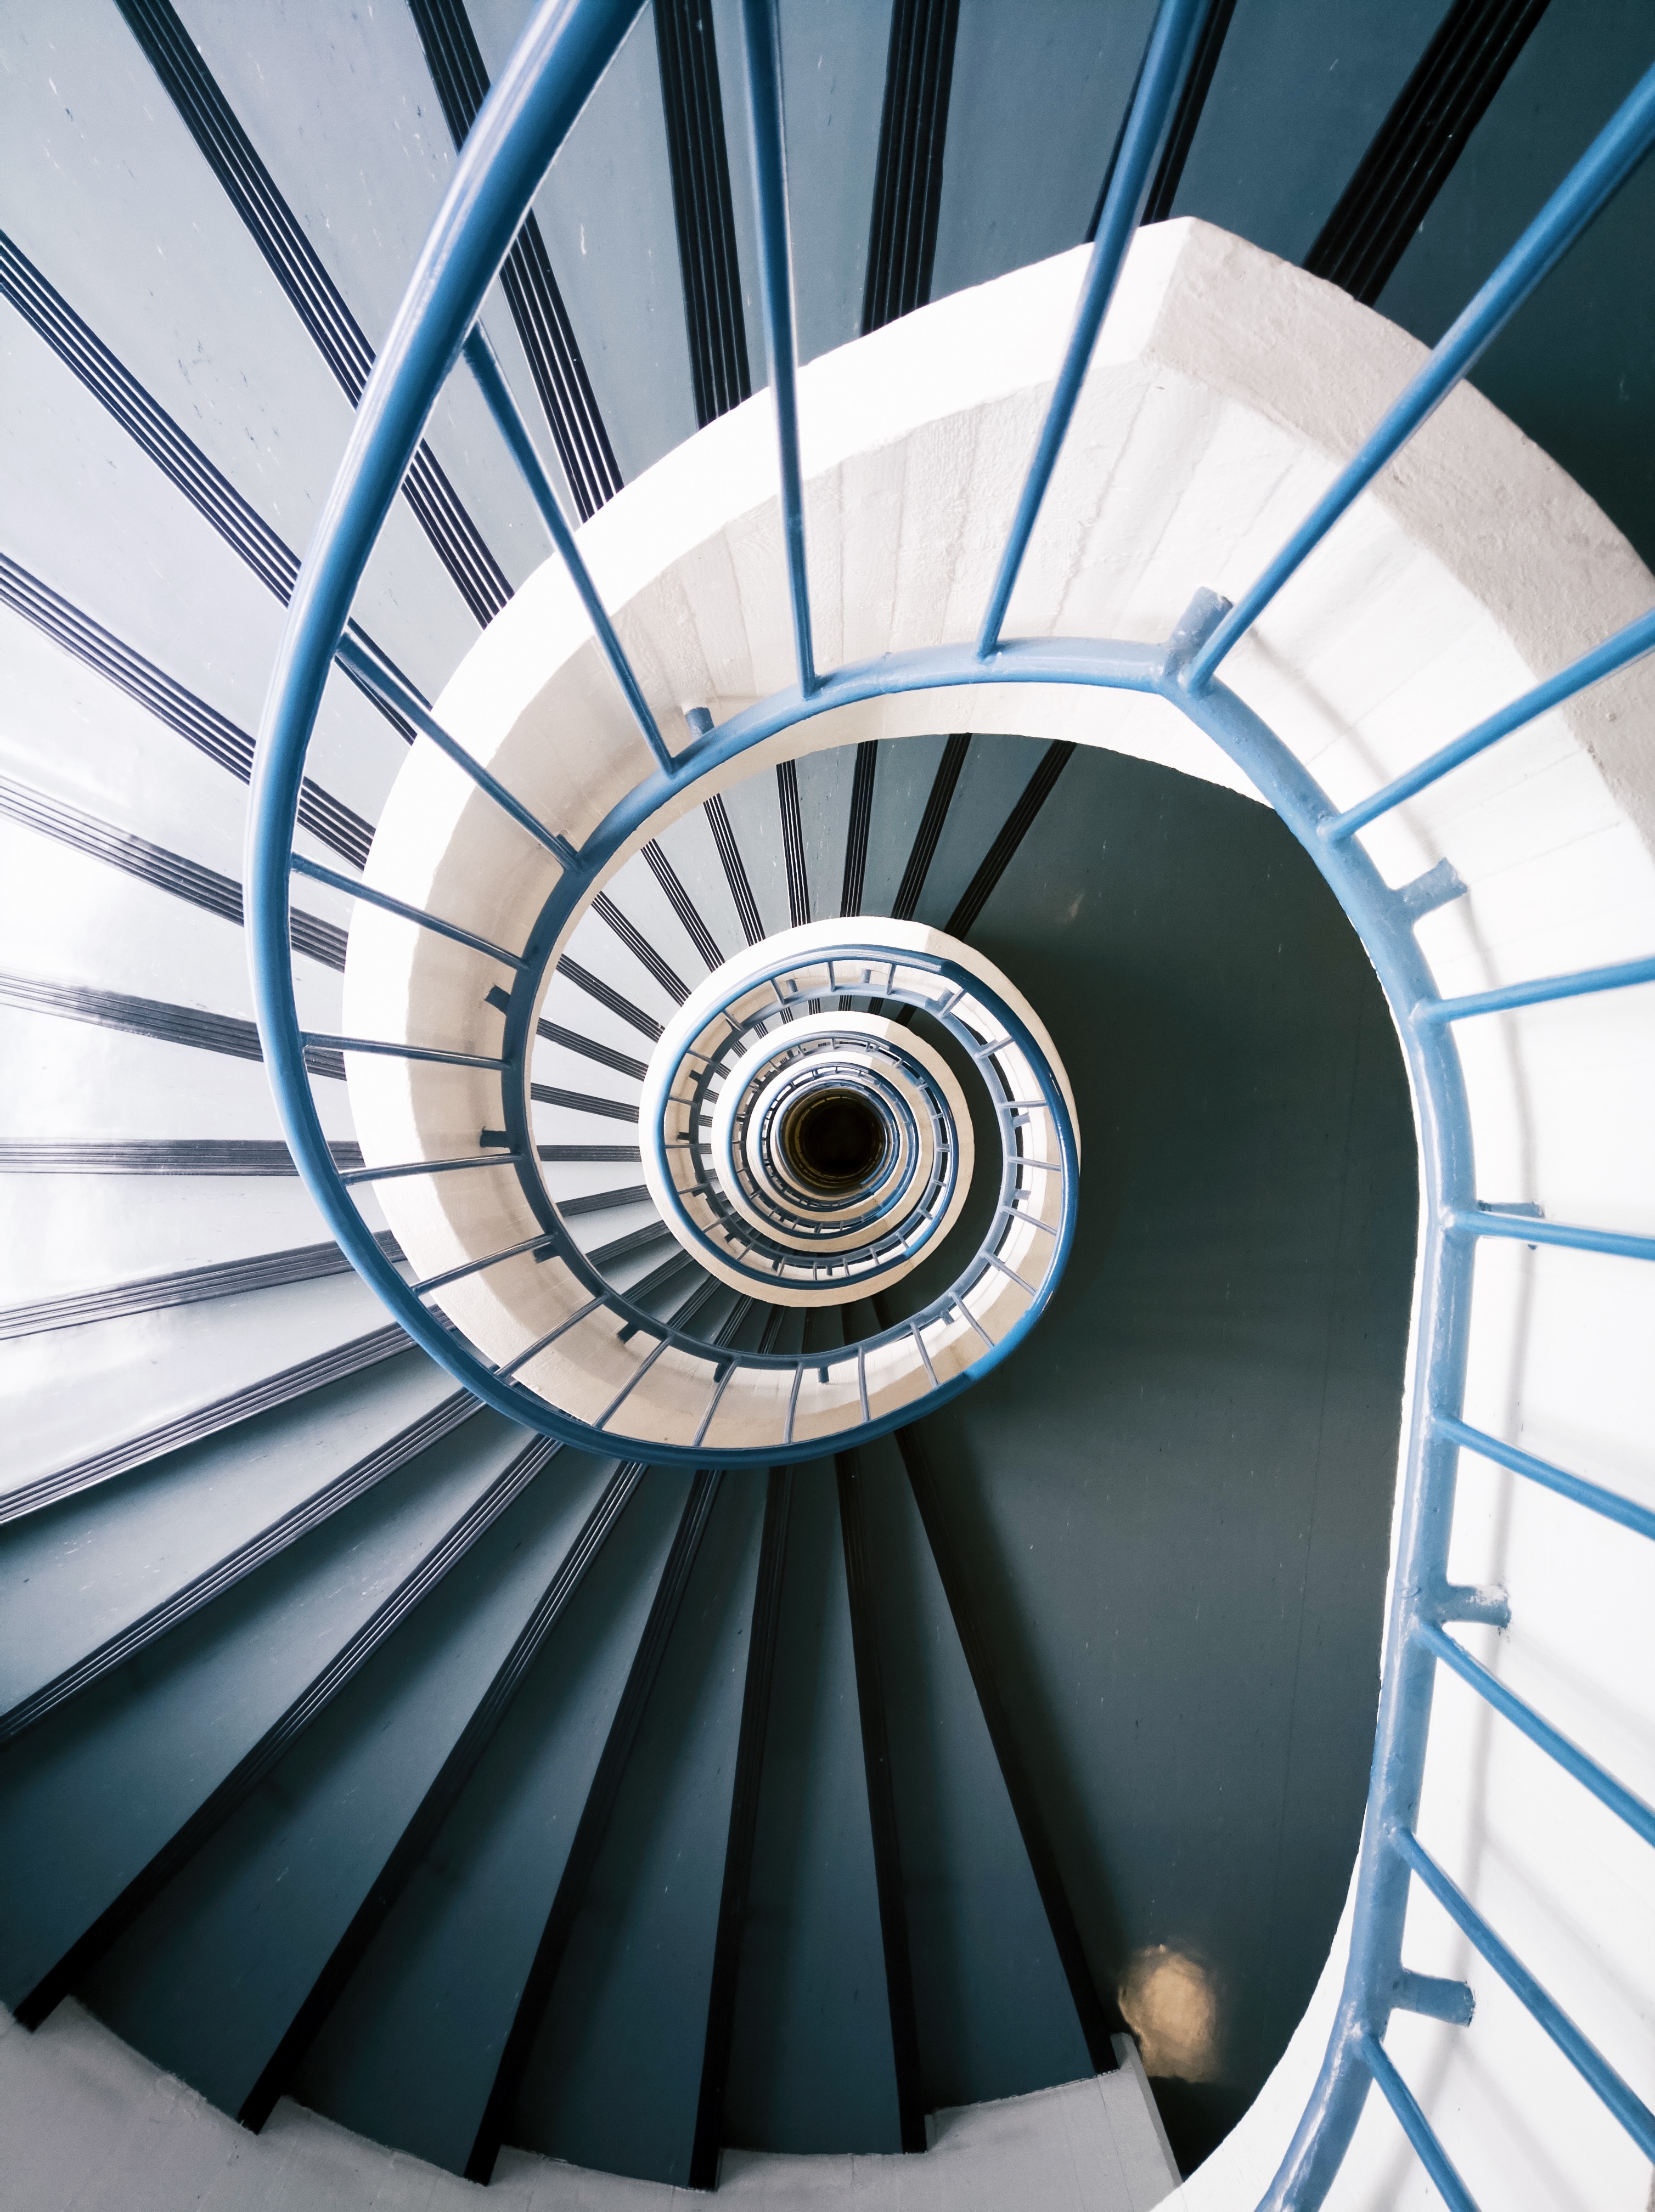 miscellanea, miscellaneous, design, construction, stairs, ladder, spiral, swirling, involute